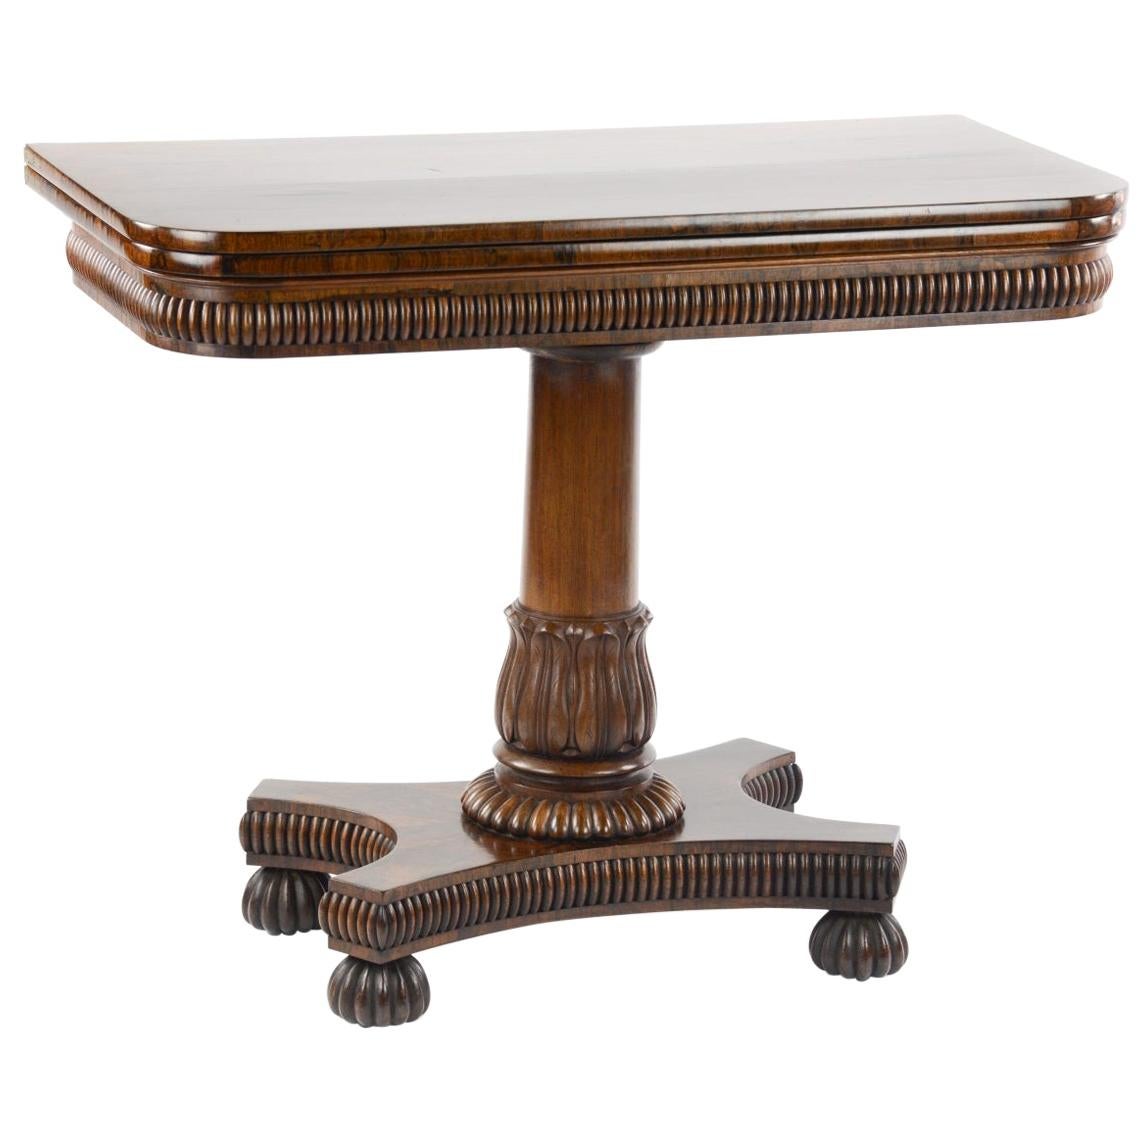 Fine William IV Rosewood Card Table, Attributed to Gillows